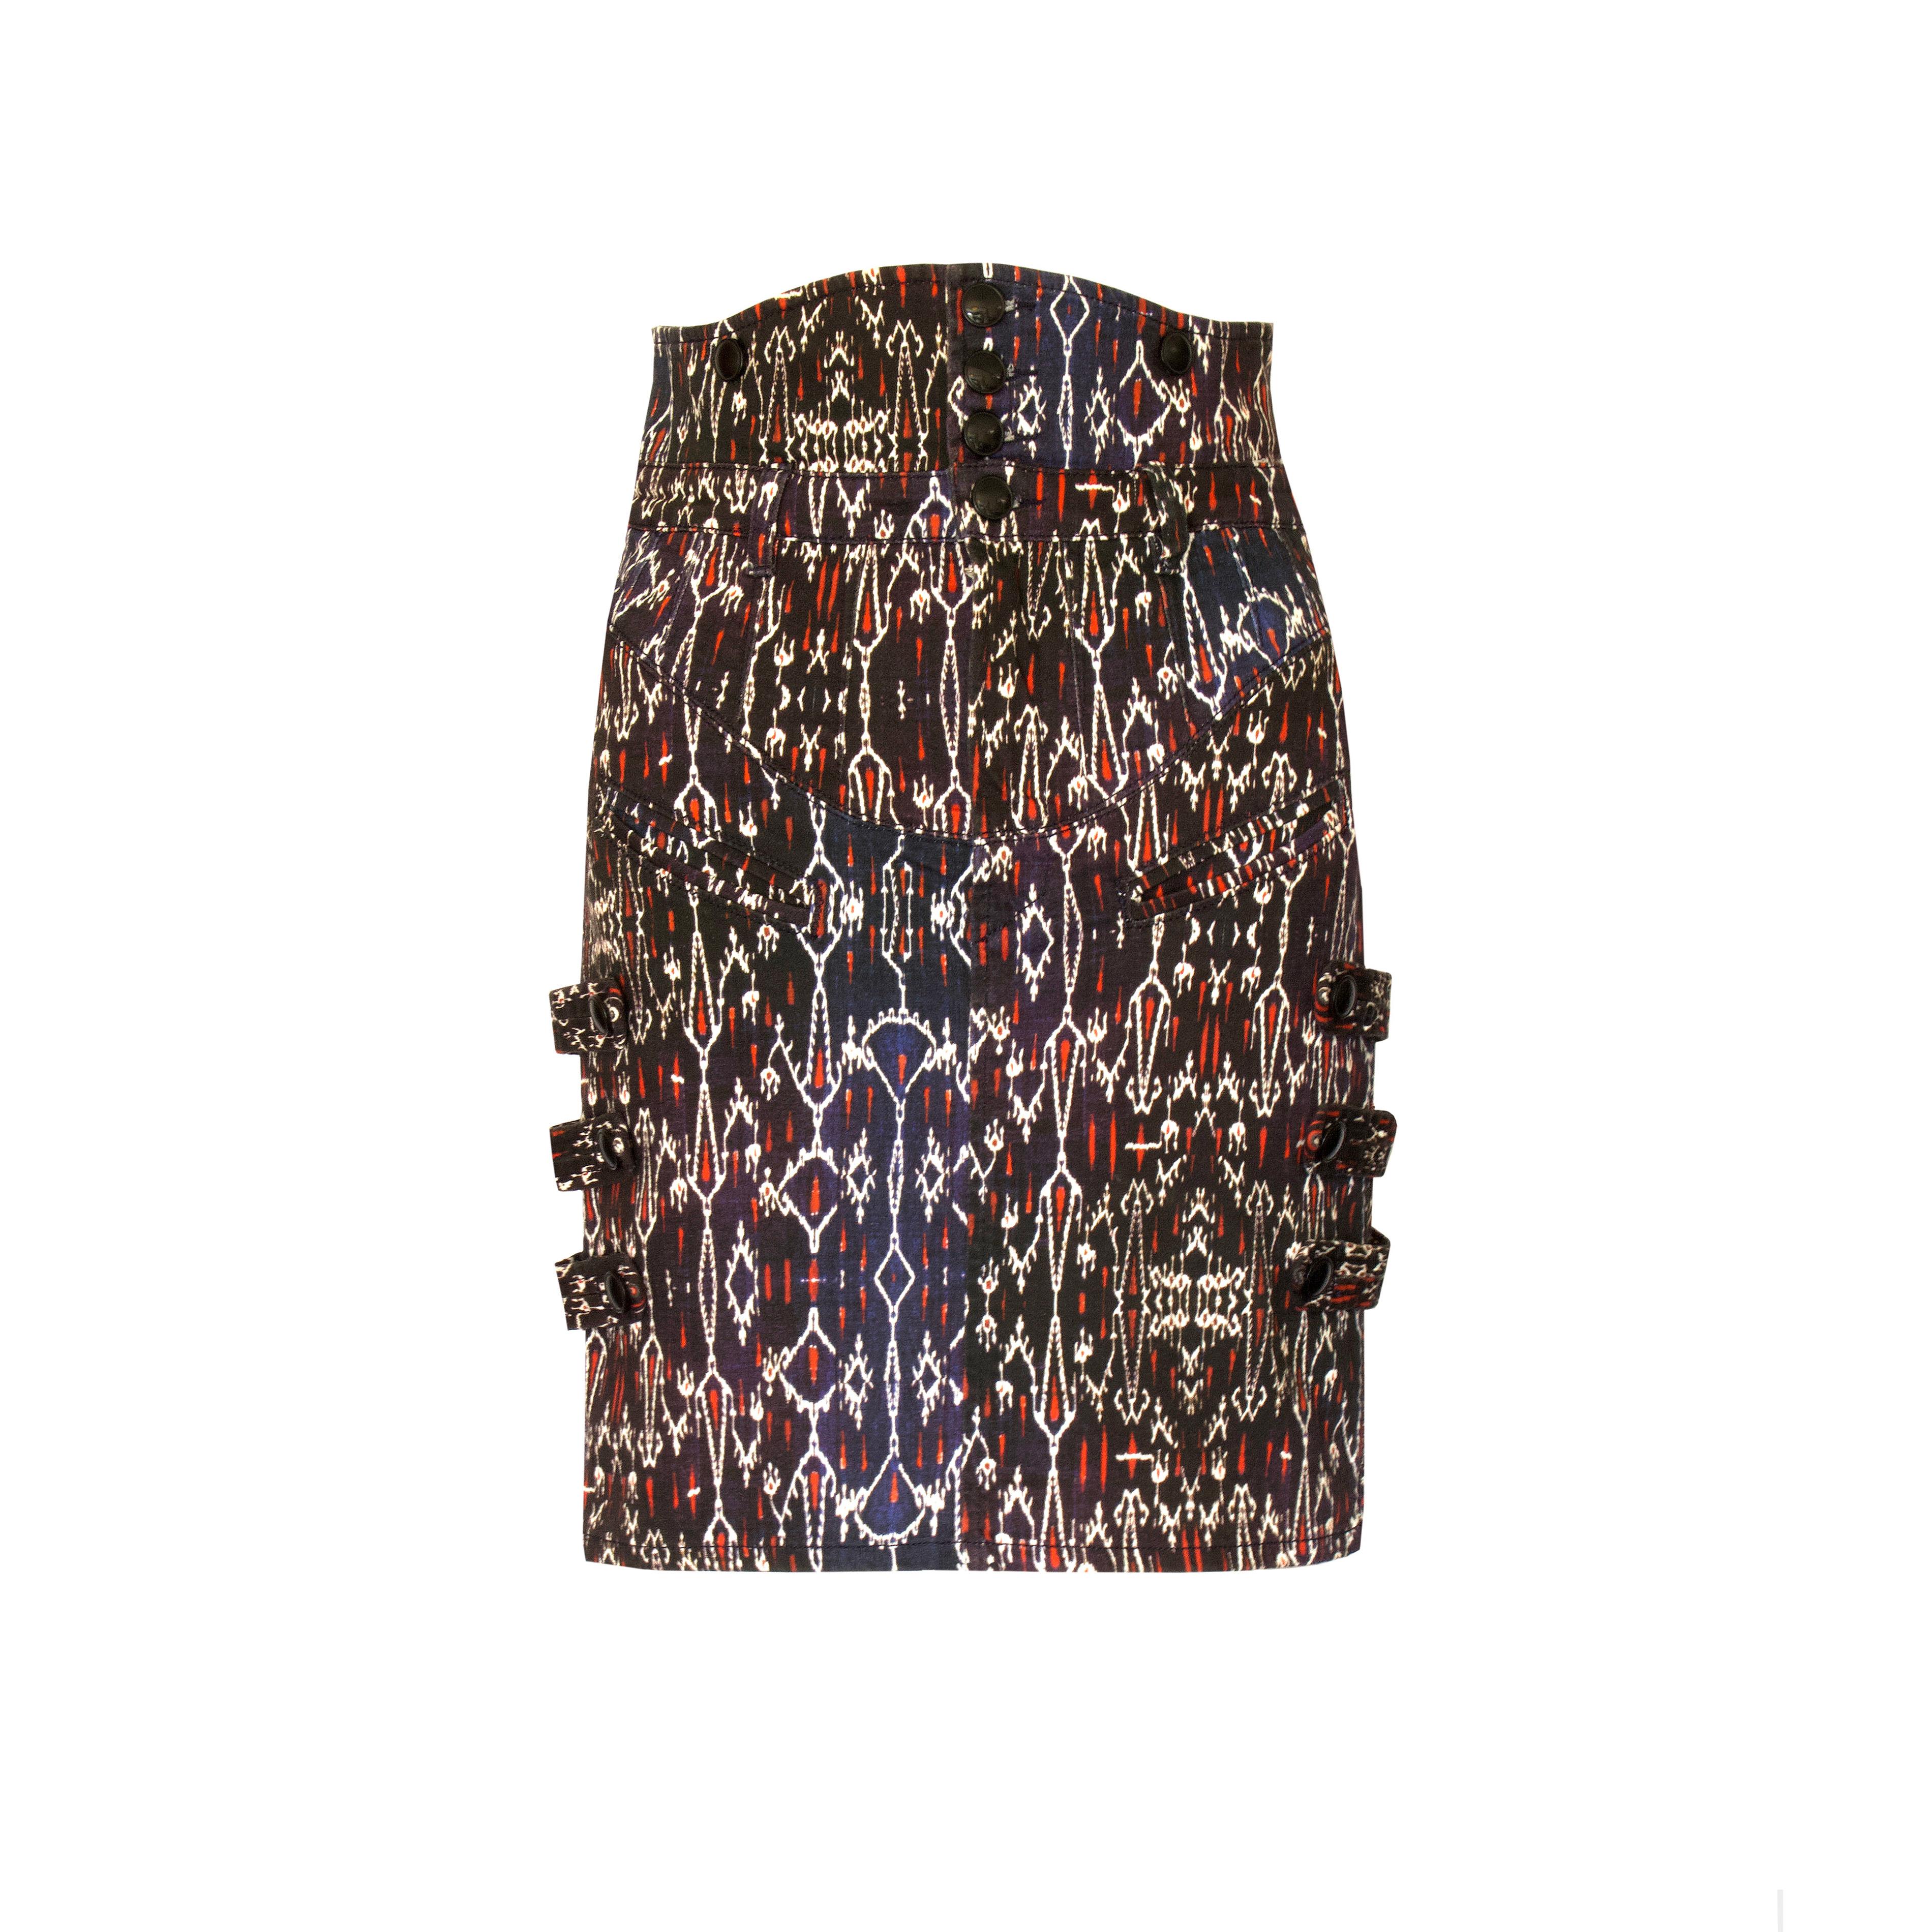 Isabel Marant Skirt - High-Waisted - Stretch Cotton - Side Strap Detailing  In Excellent Condition For Sale In KENT, GB